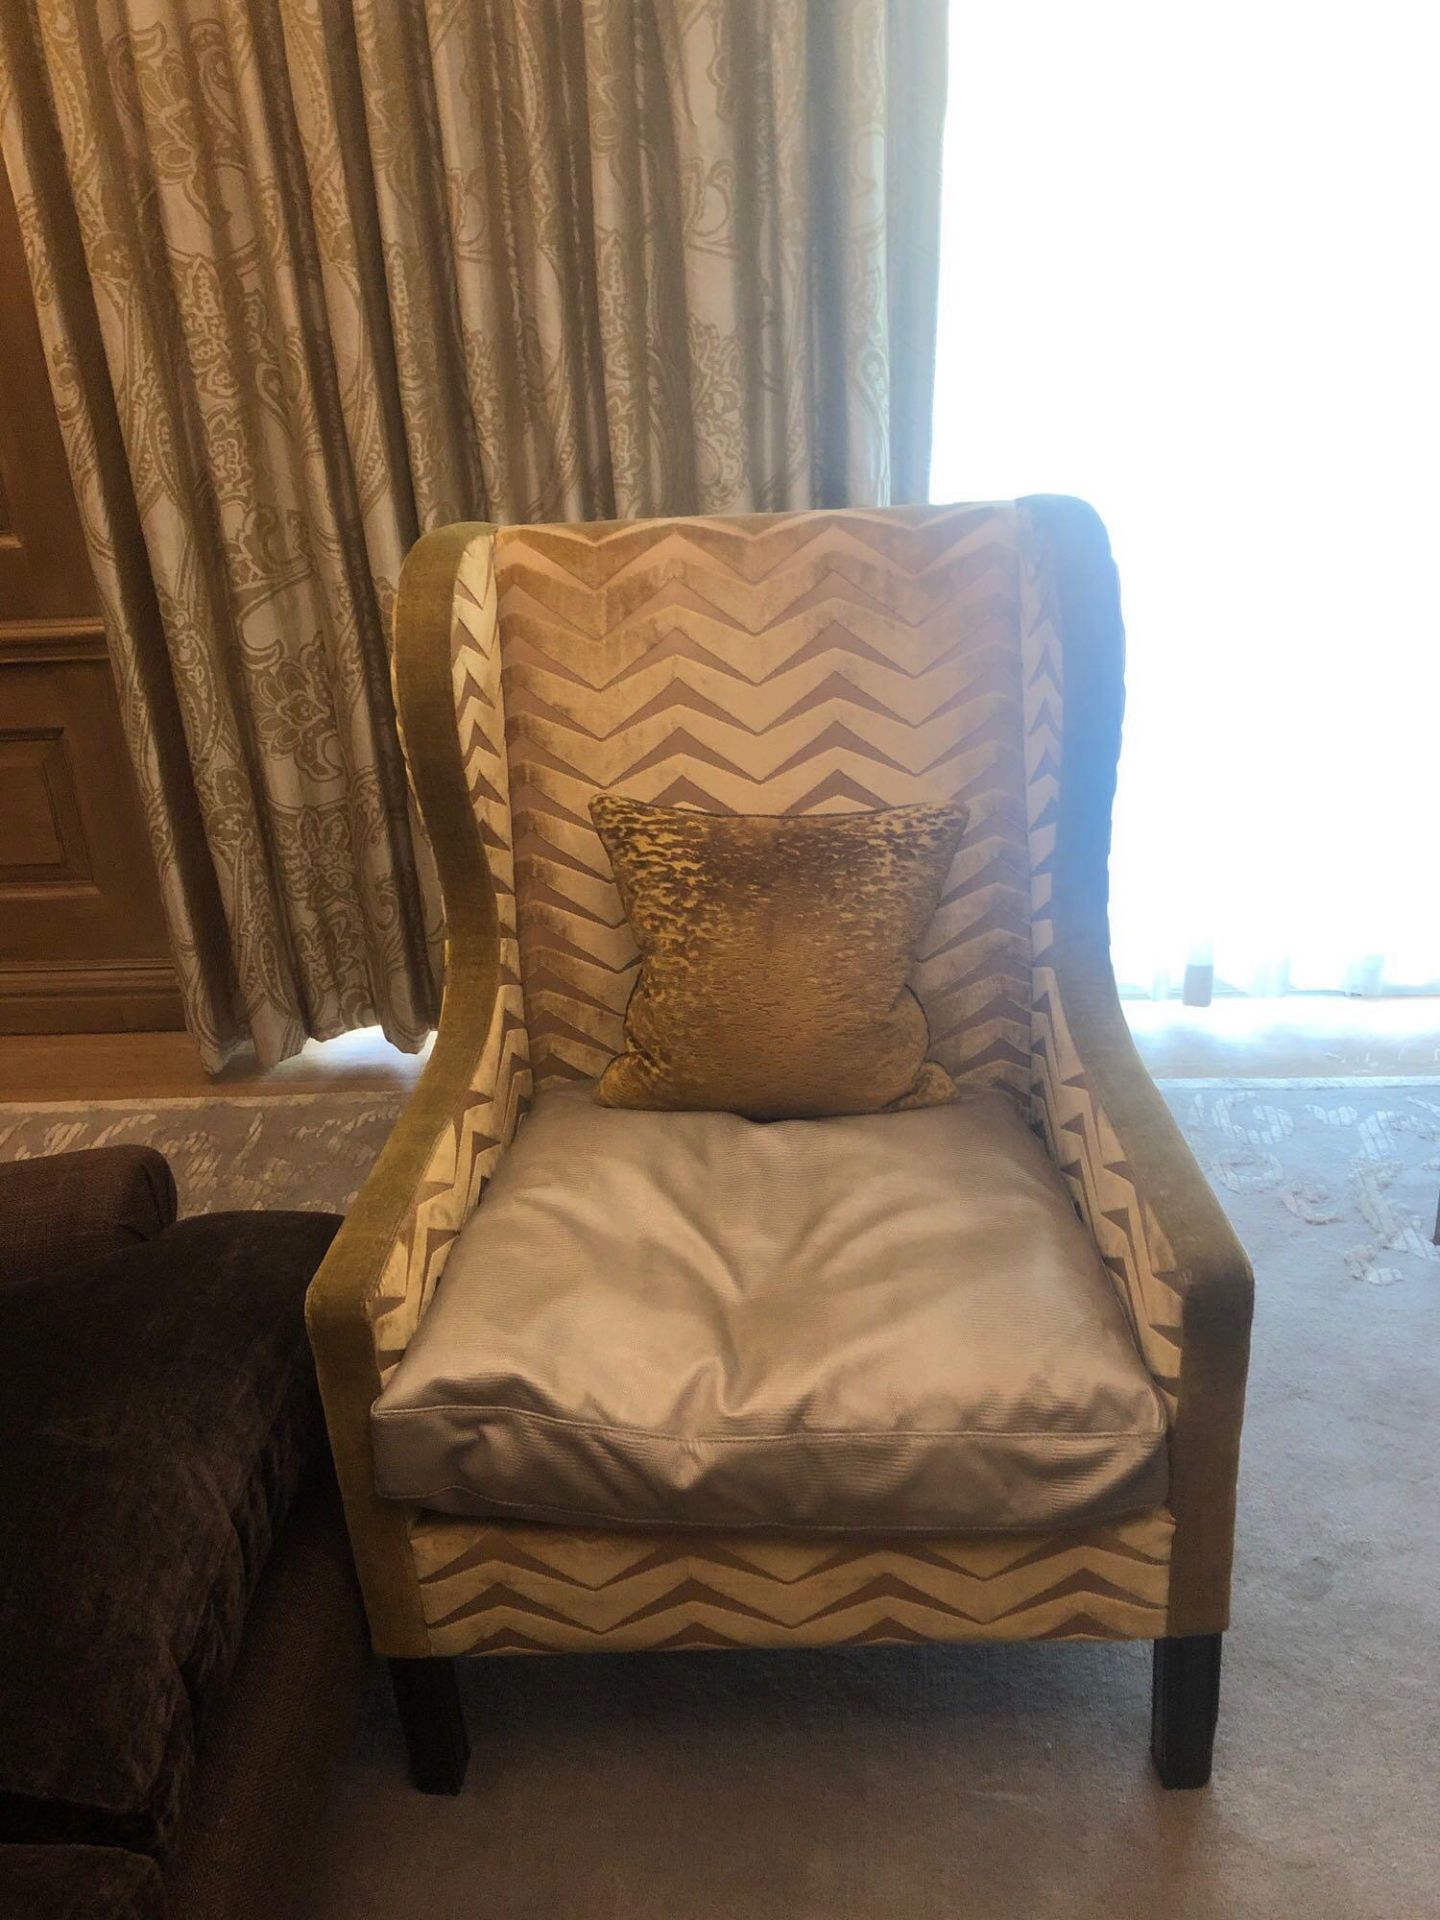 A Wingback Chair With Gold Chevron Fabric 78 x 62 x 106cm (Room 210)